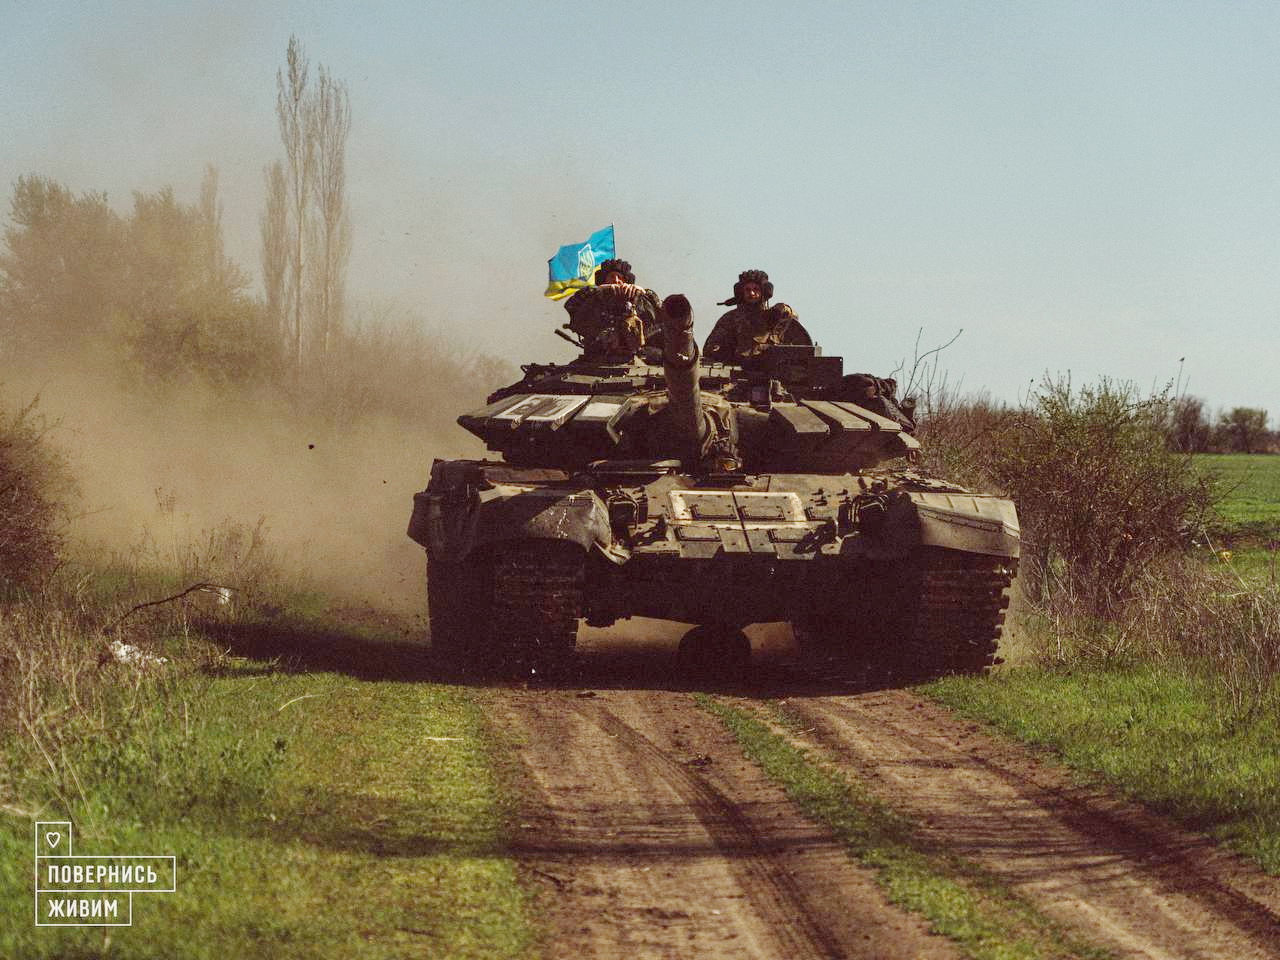 A Ukrainian tank crew operating a captured Russian T-72B3 on the front line, Defense Express